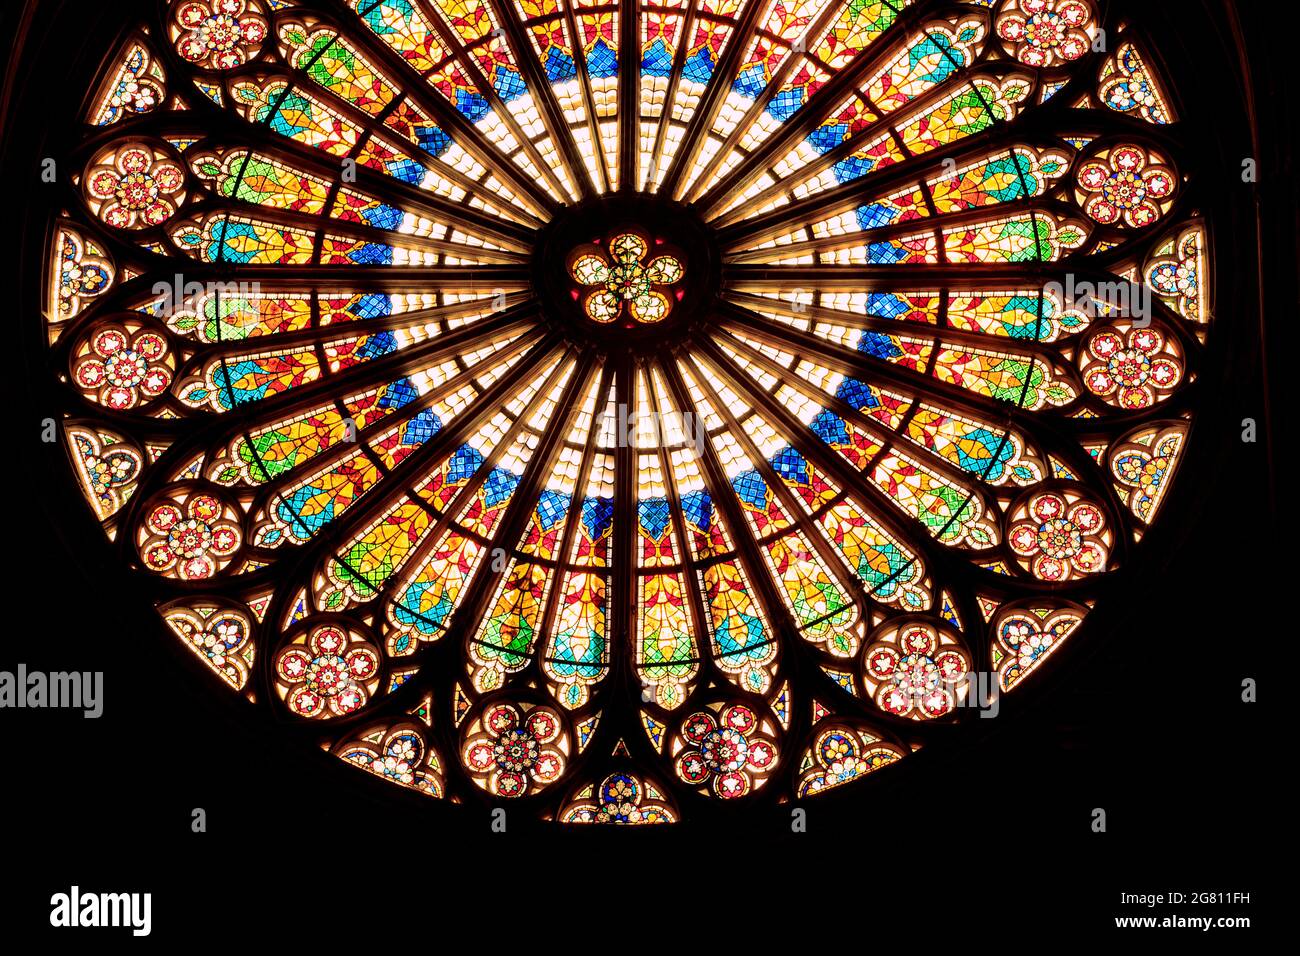 Strasbourg, Alace/ France - 10/10/2020: Rosette, huge beautiful stained glass rose window by the interior of notre dame cathedral in Strasbourg Stock Photo